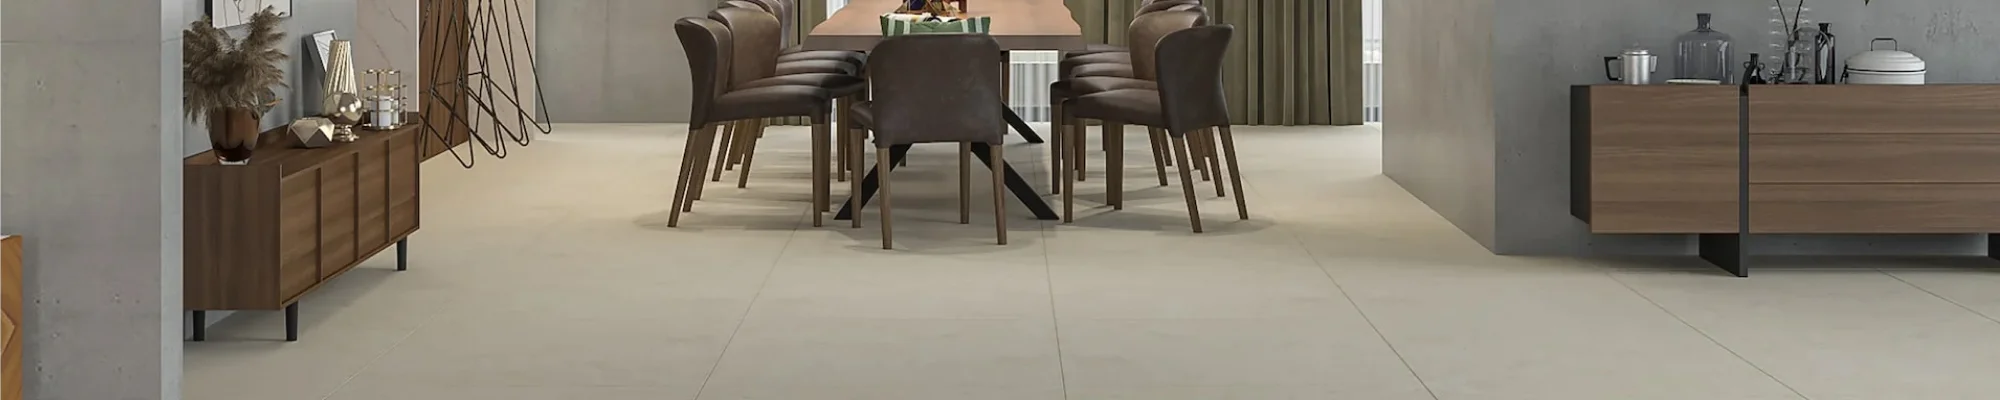 Nistler Floor Covering offers a variety of ceramic tile brands and styles.